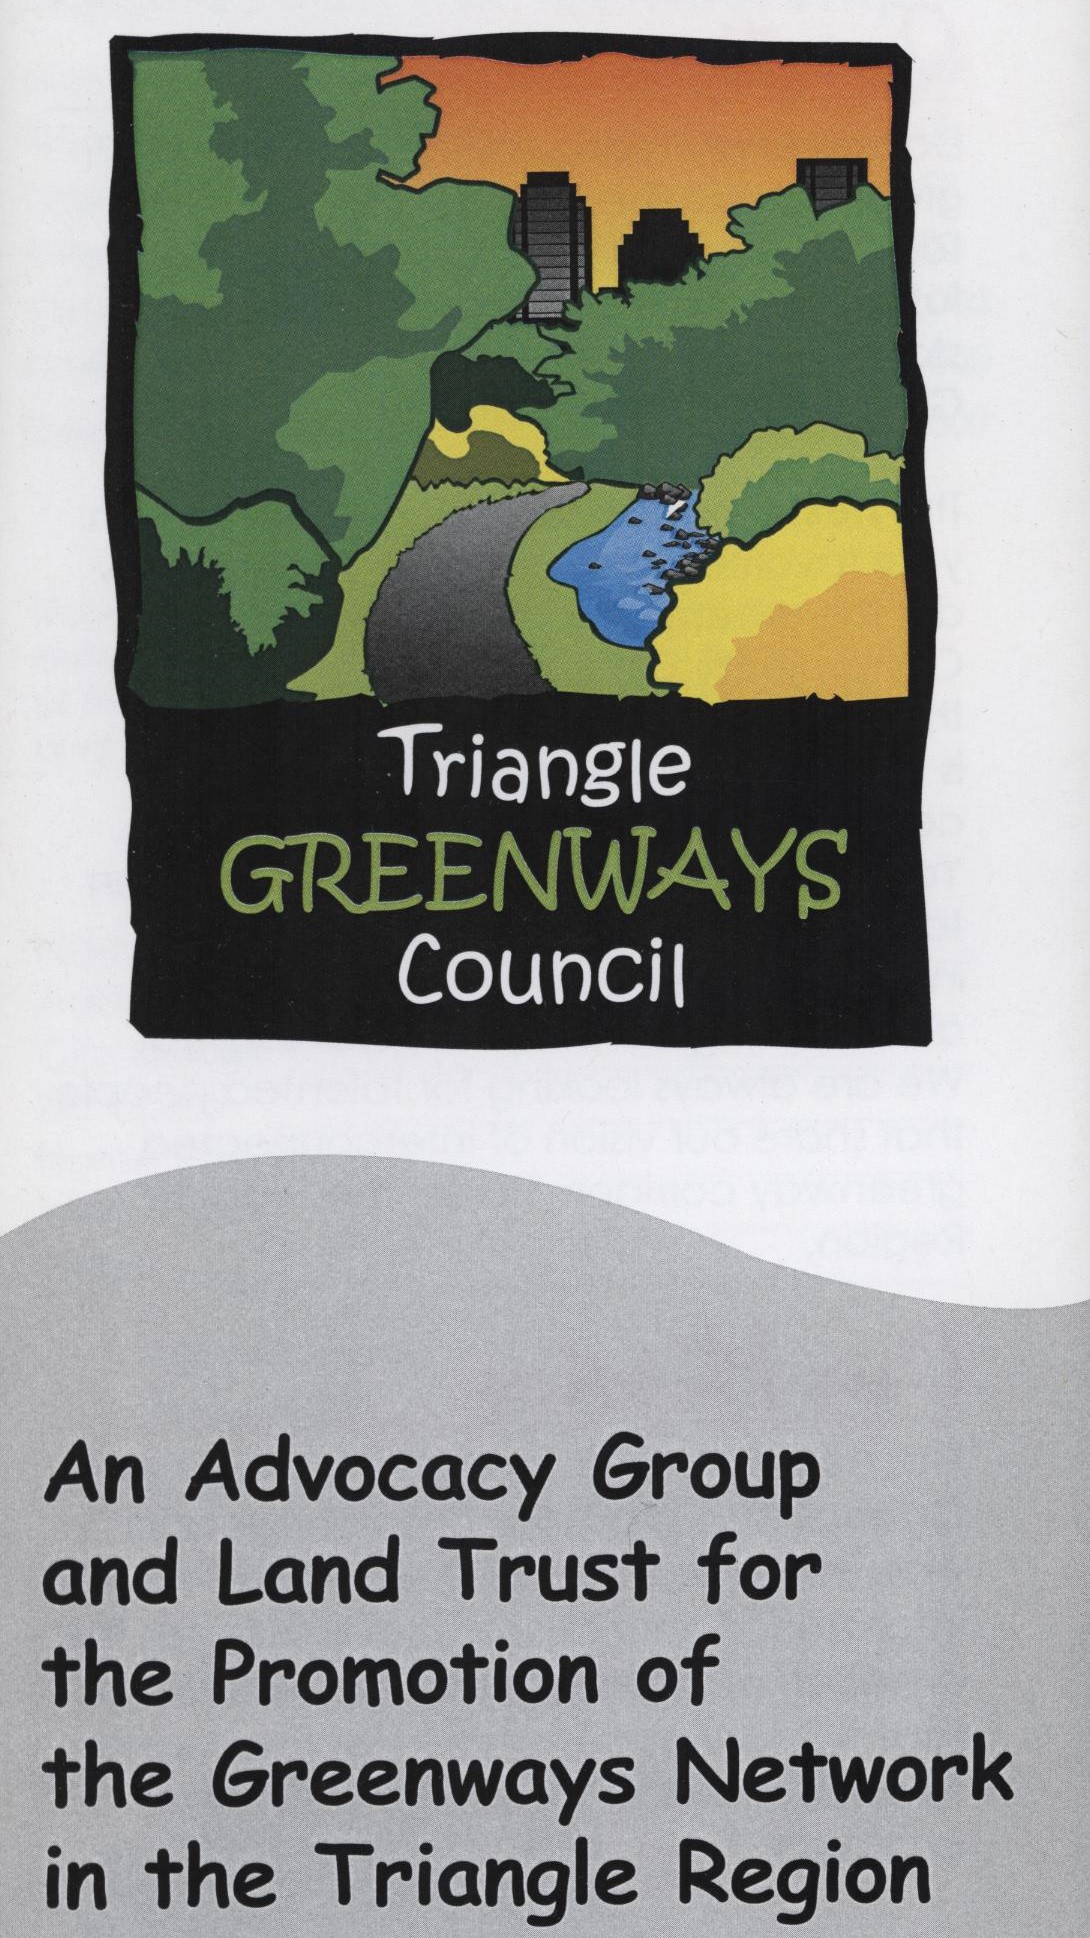 Pamphlet for the Triangle Greenways Council (MC 00503, Box 93, Folder 1)